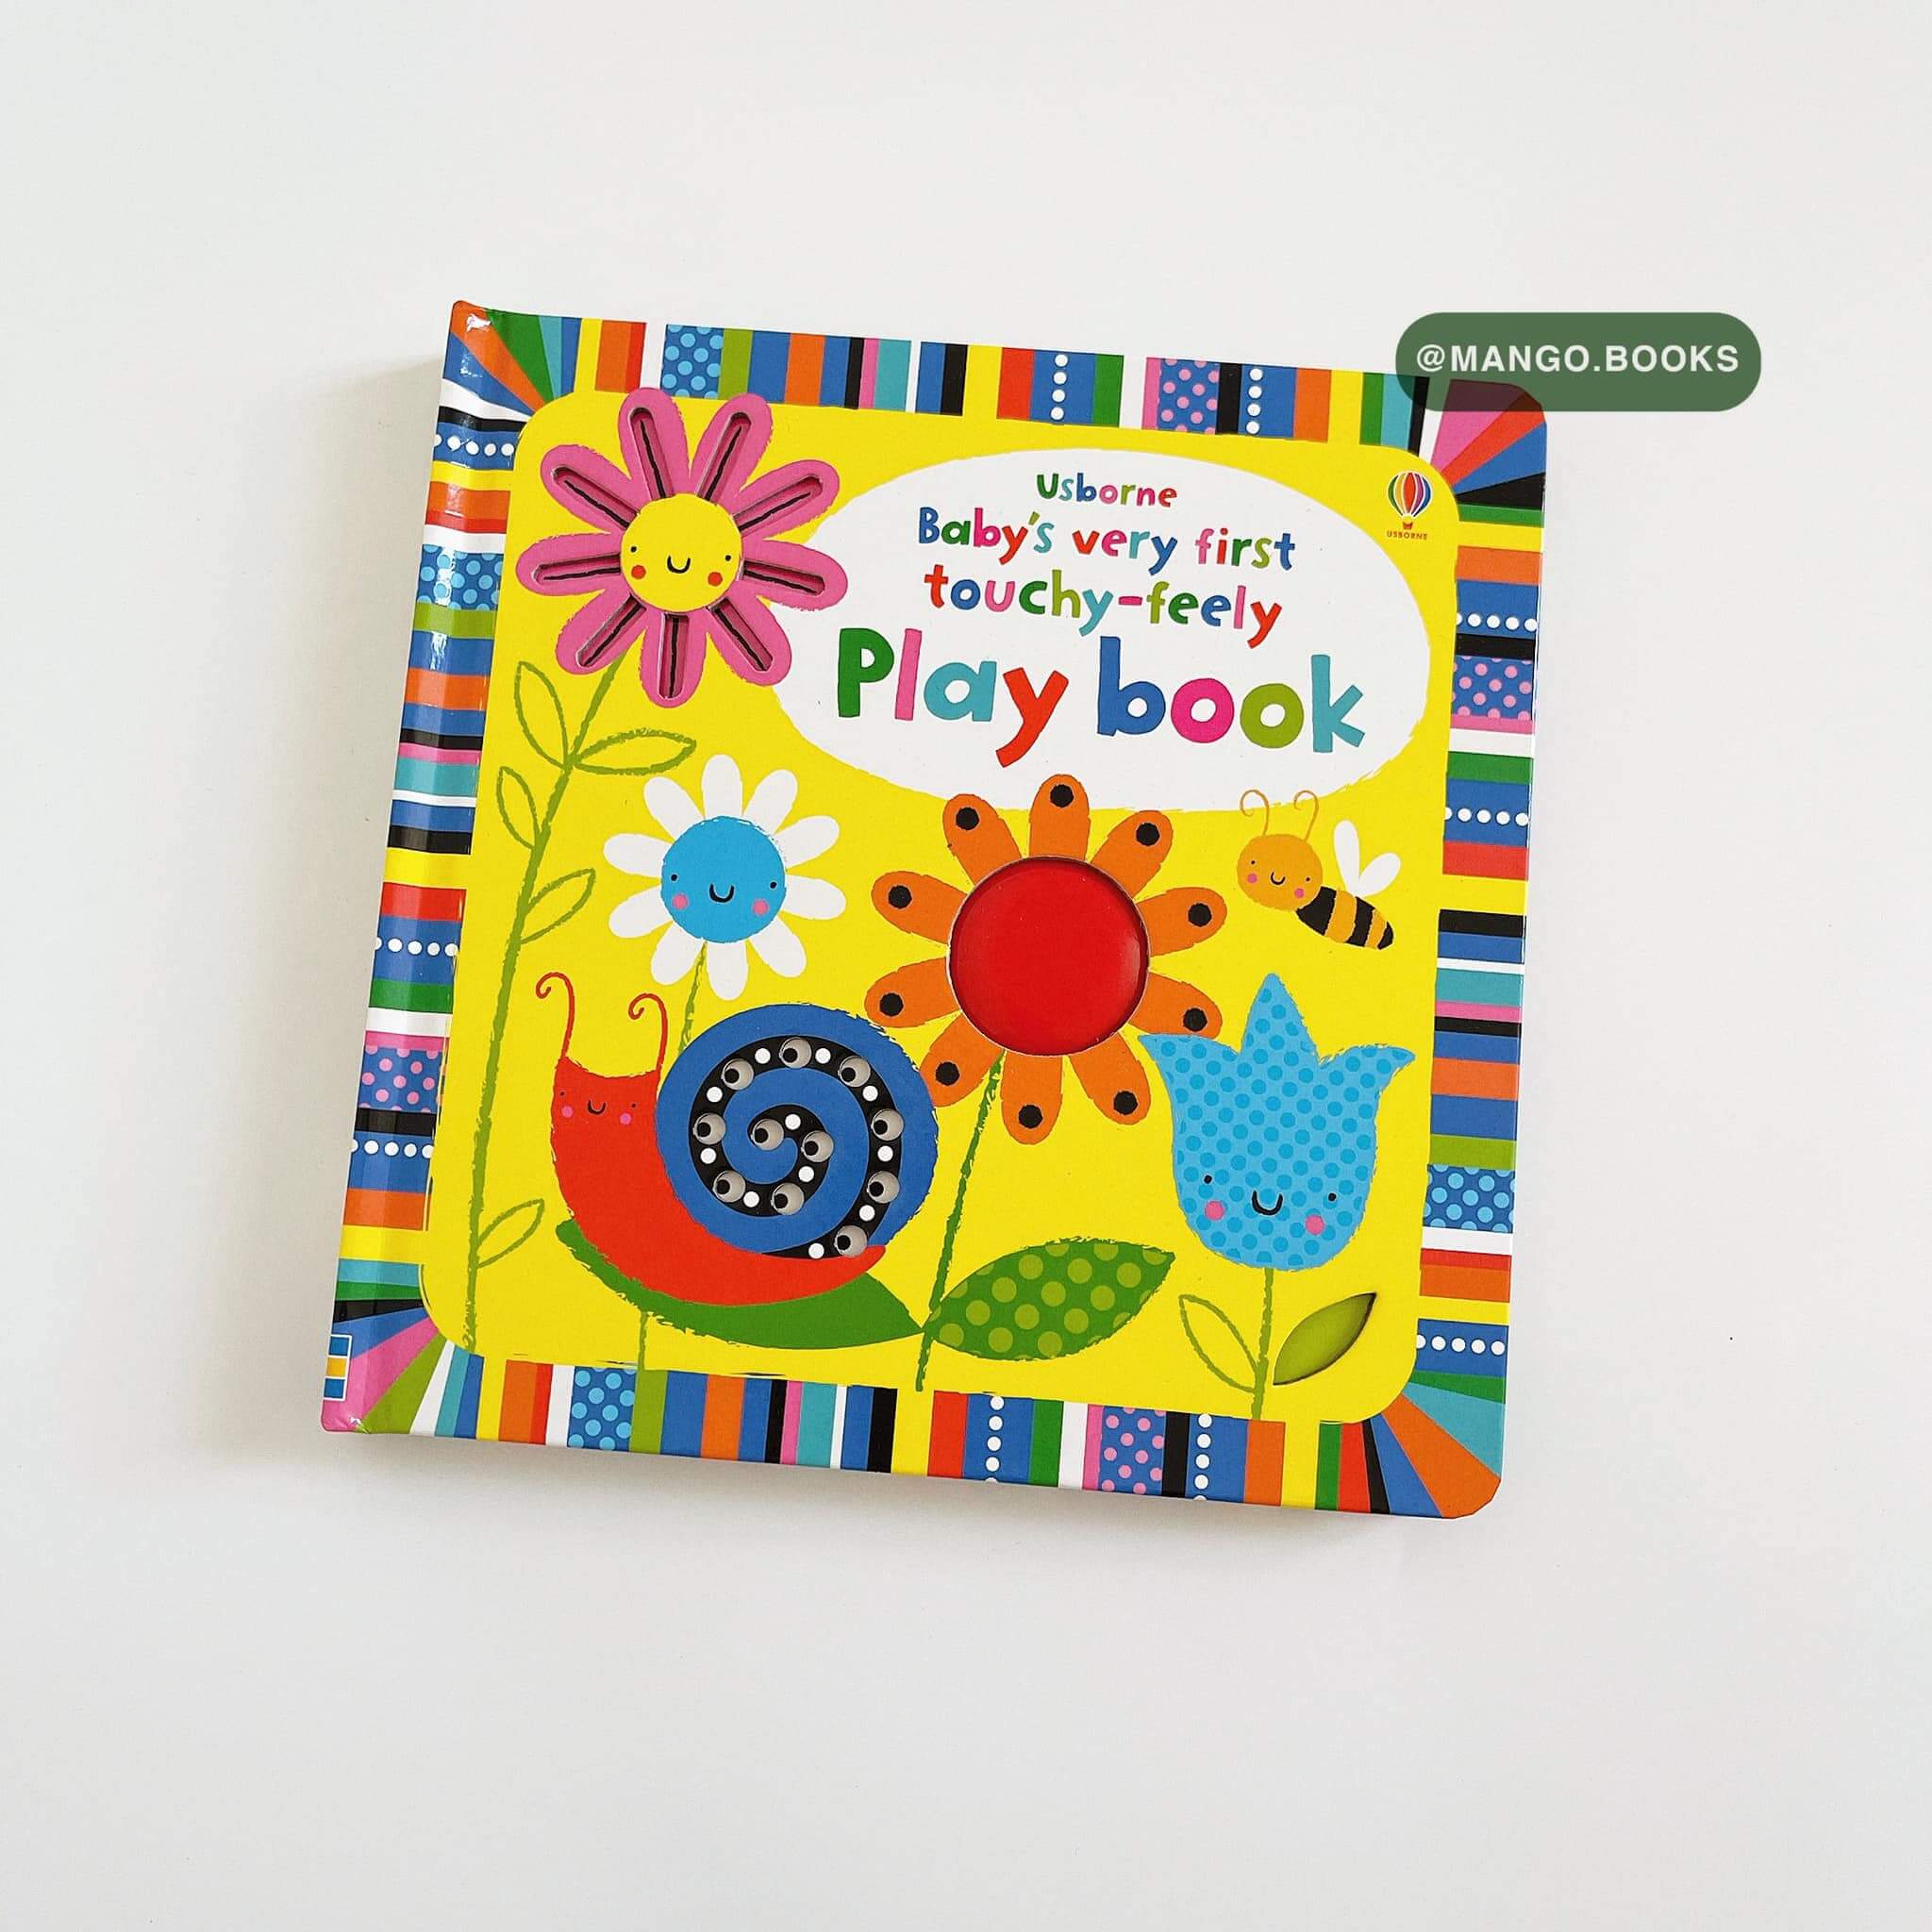 Baby's Very First Touchy-Feely Play book